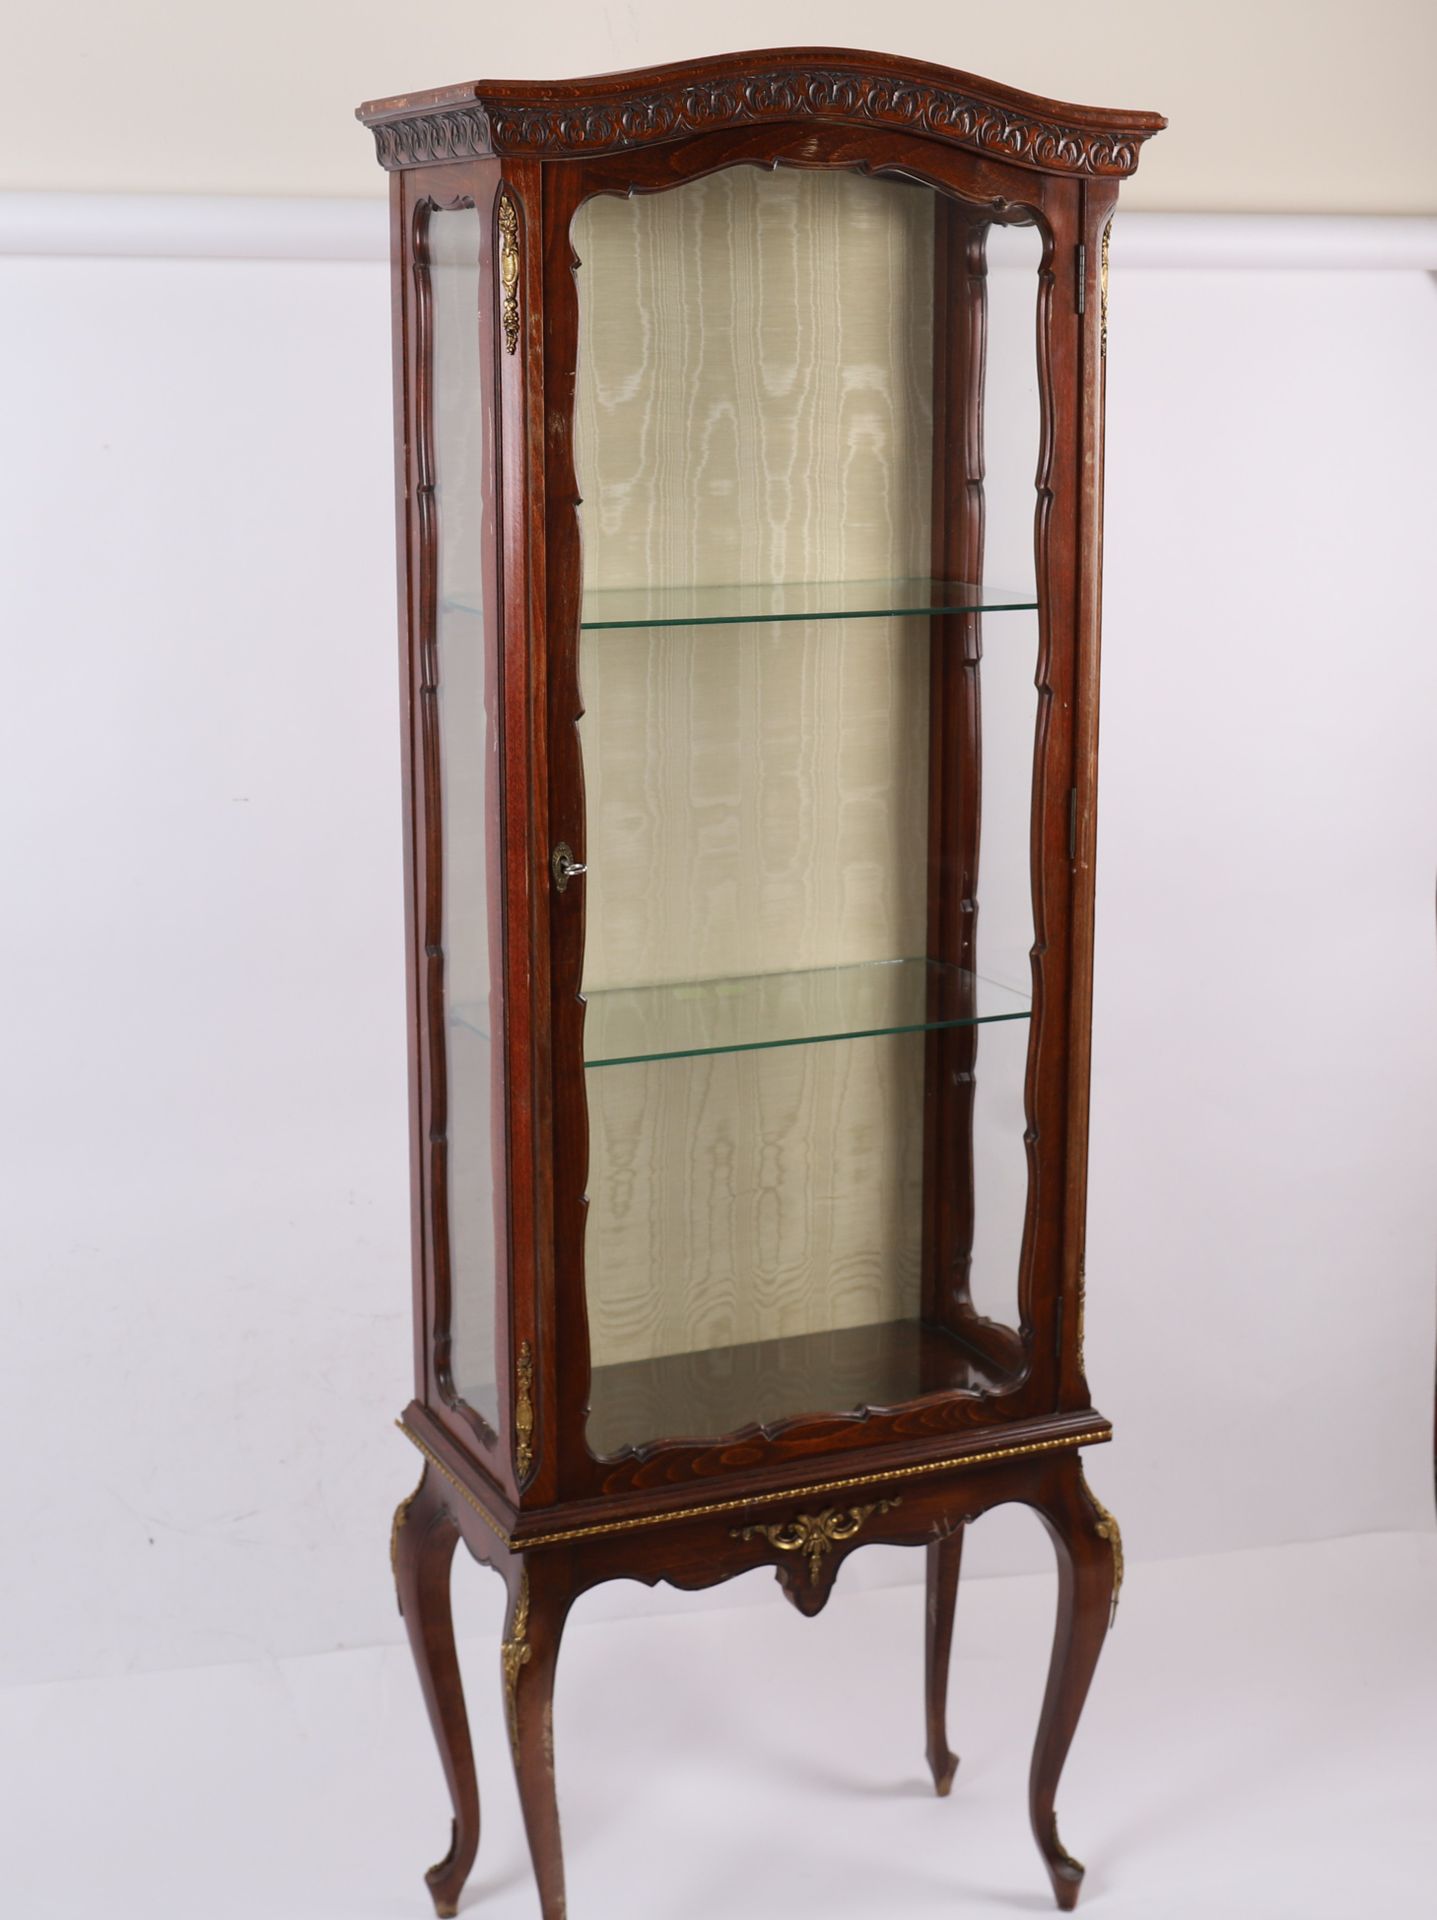 Null CHARMING DISPLAY CABINET WITH CURVED LEGS
In partially carved wood and glas&hellip;